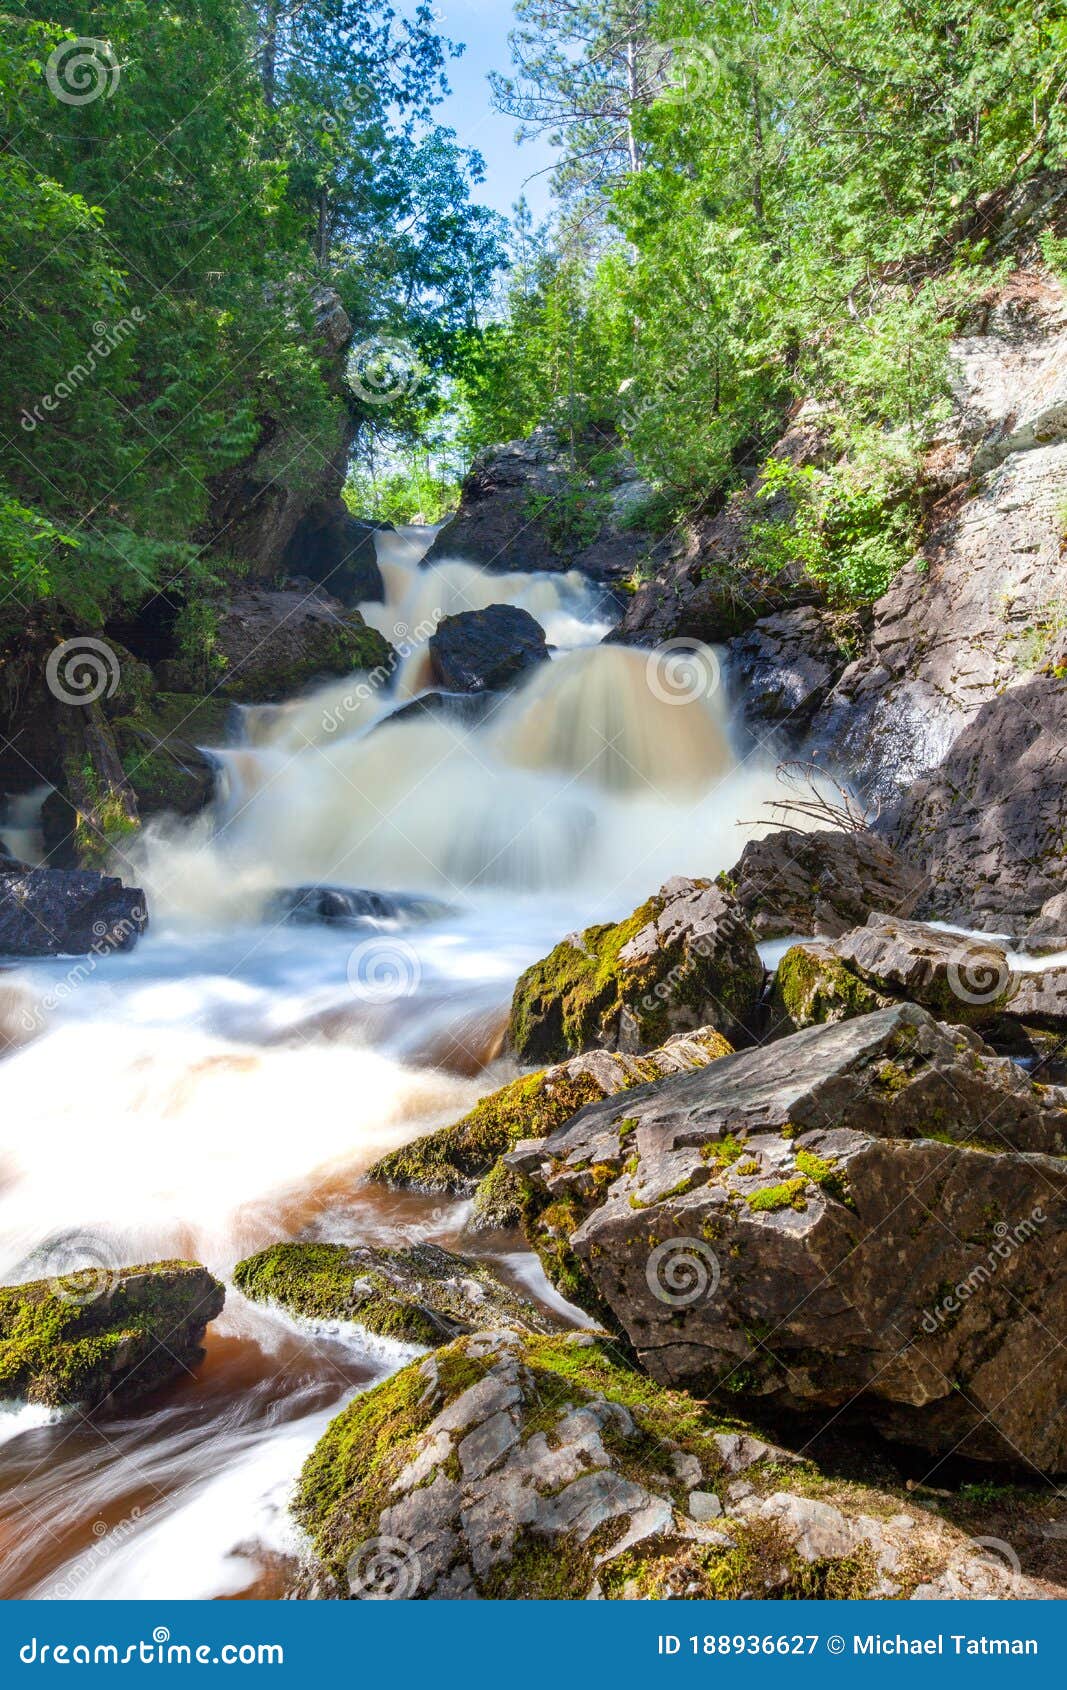 long slide falls, marinette county, wisconsin june 2020 on the north branch pemebonwon river